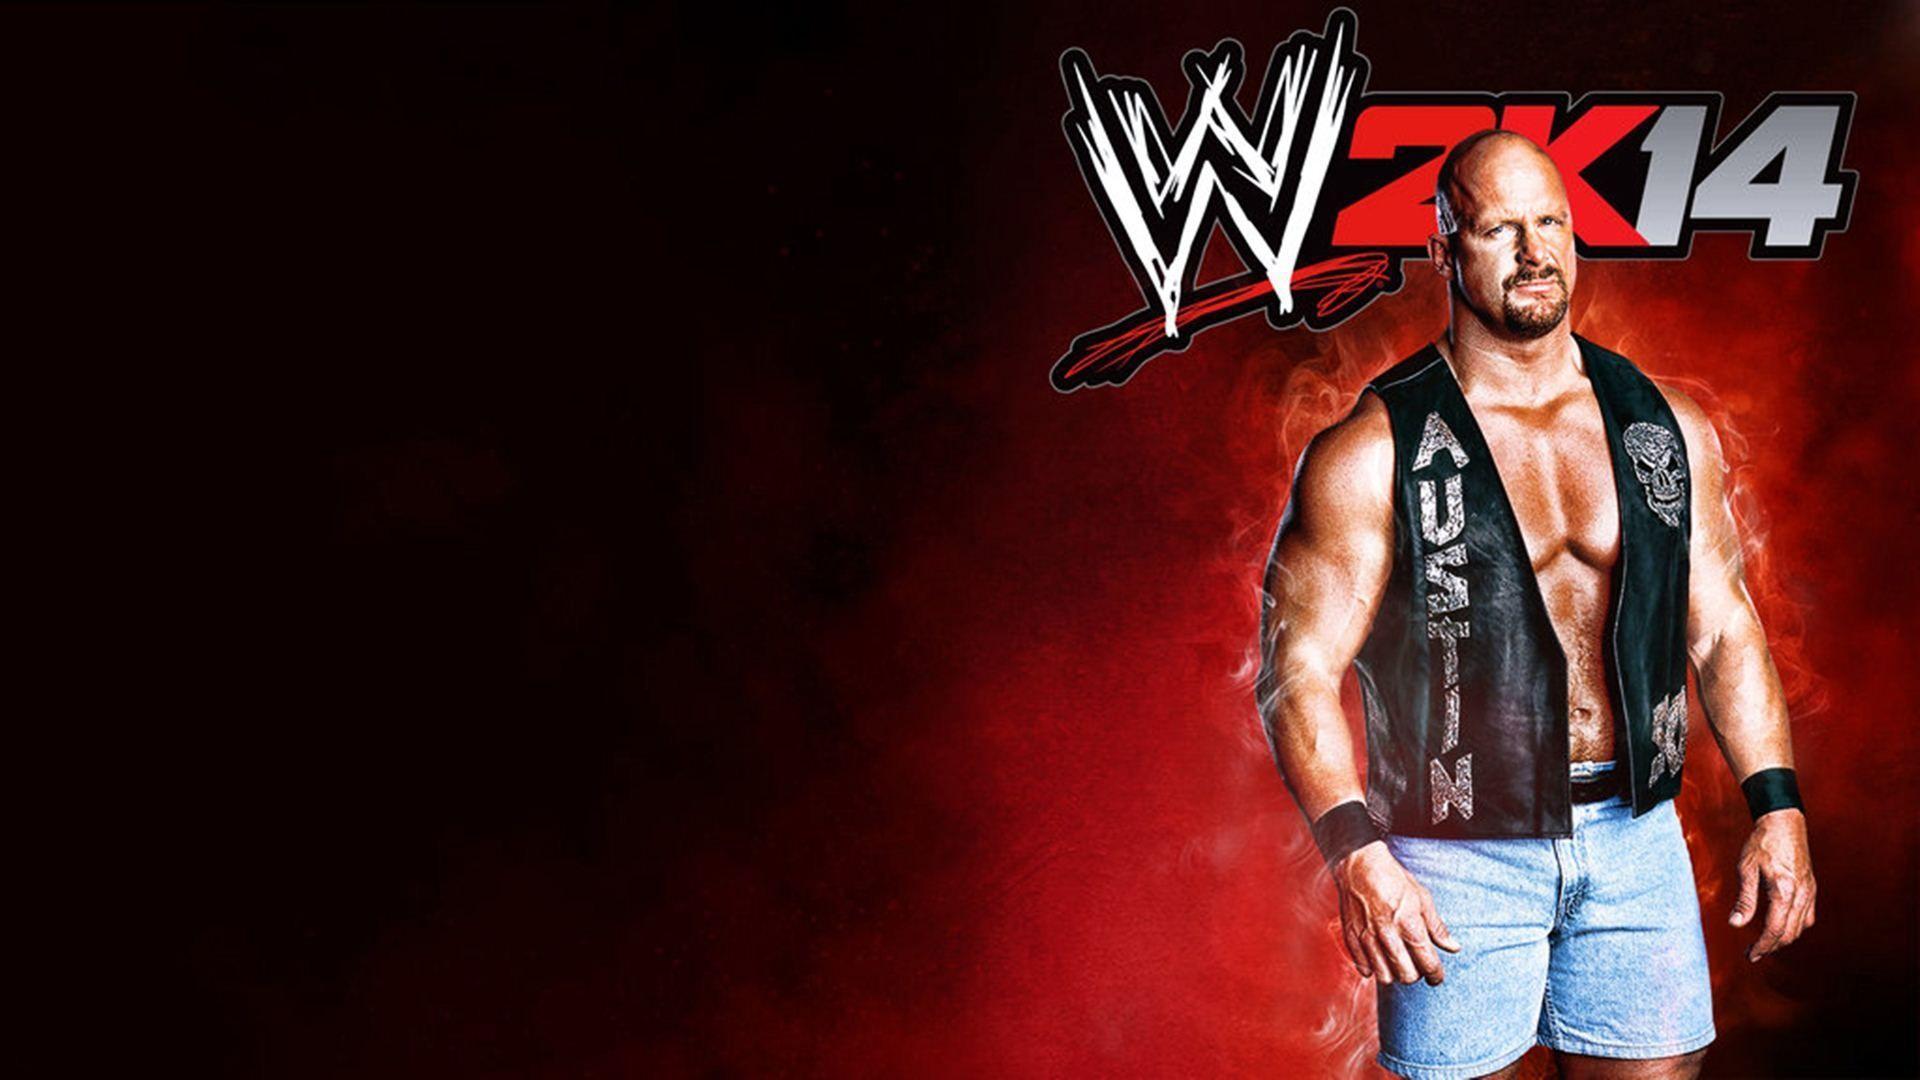 Stone Cold Steve Austin Wallpapers Wwe